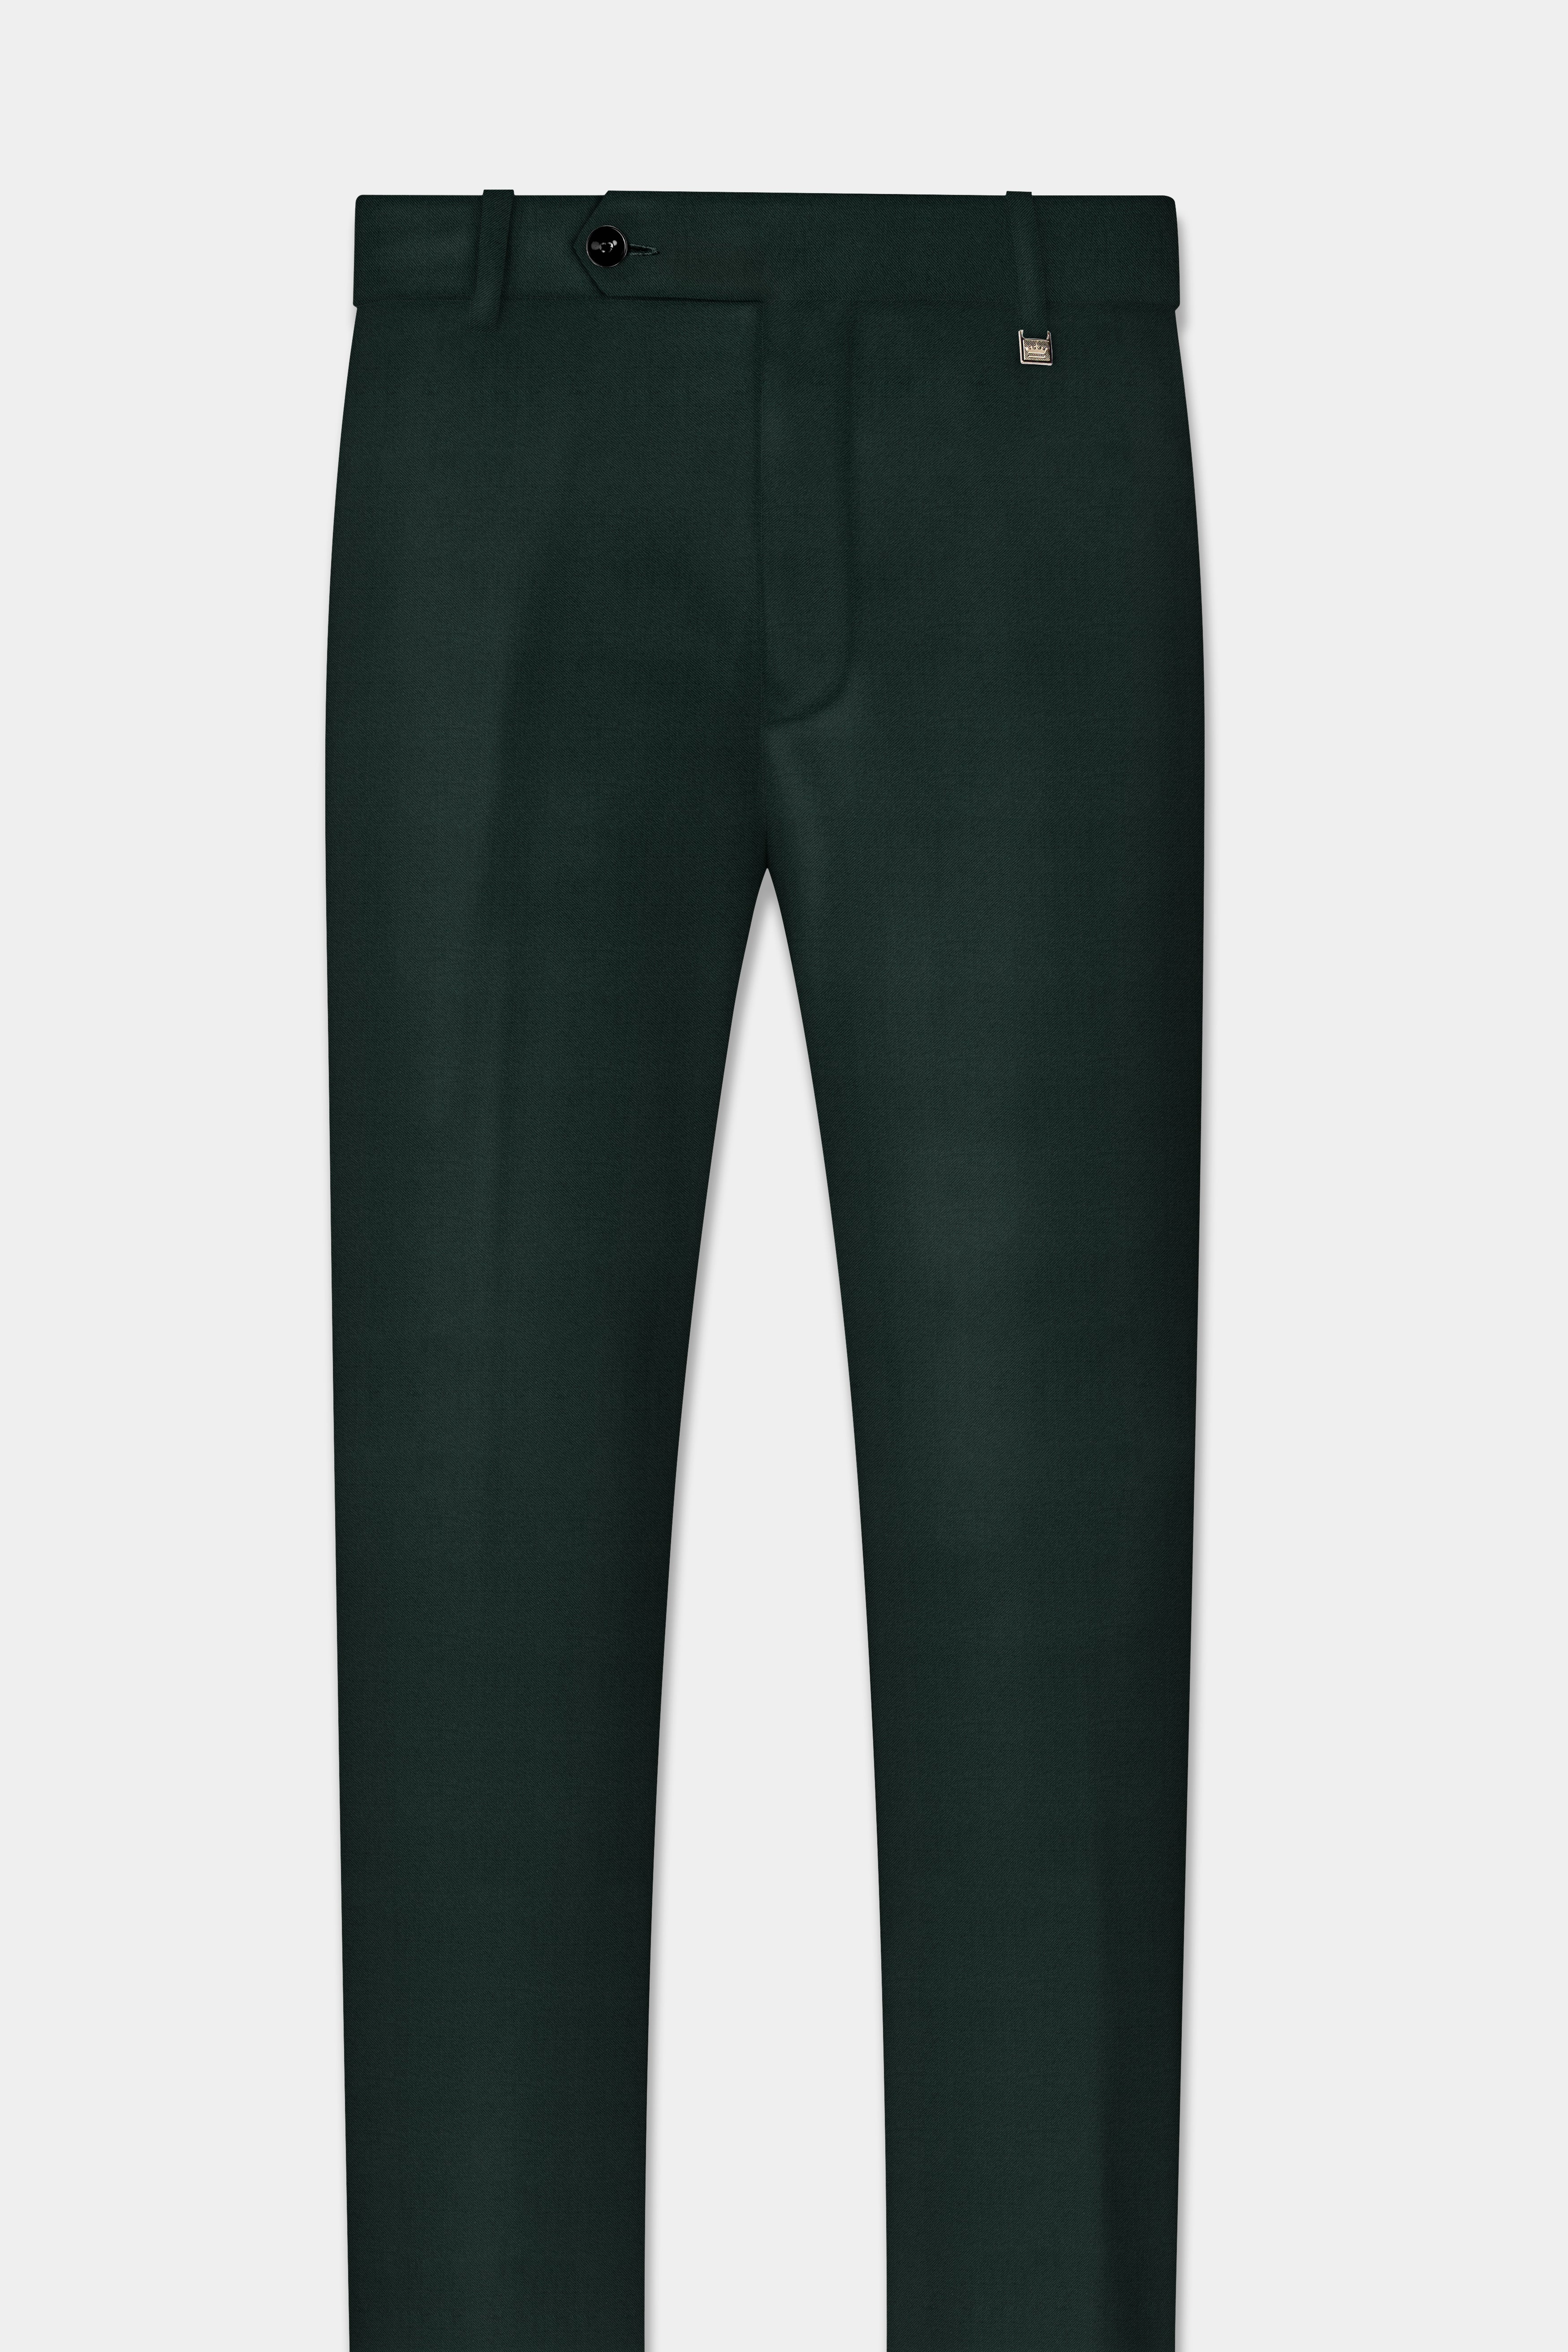 Pure Cotton Mens Trousers - Buy Pure Cotton Mens Trousers Online at Best  Prices In India | Flipkart.com